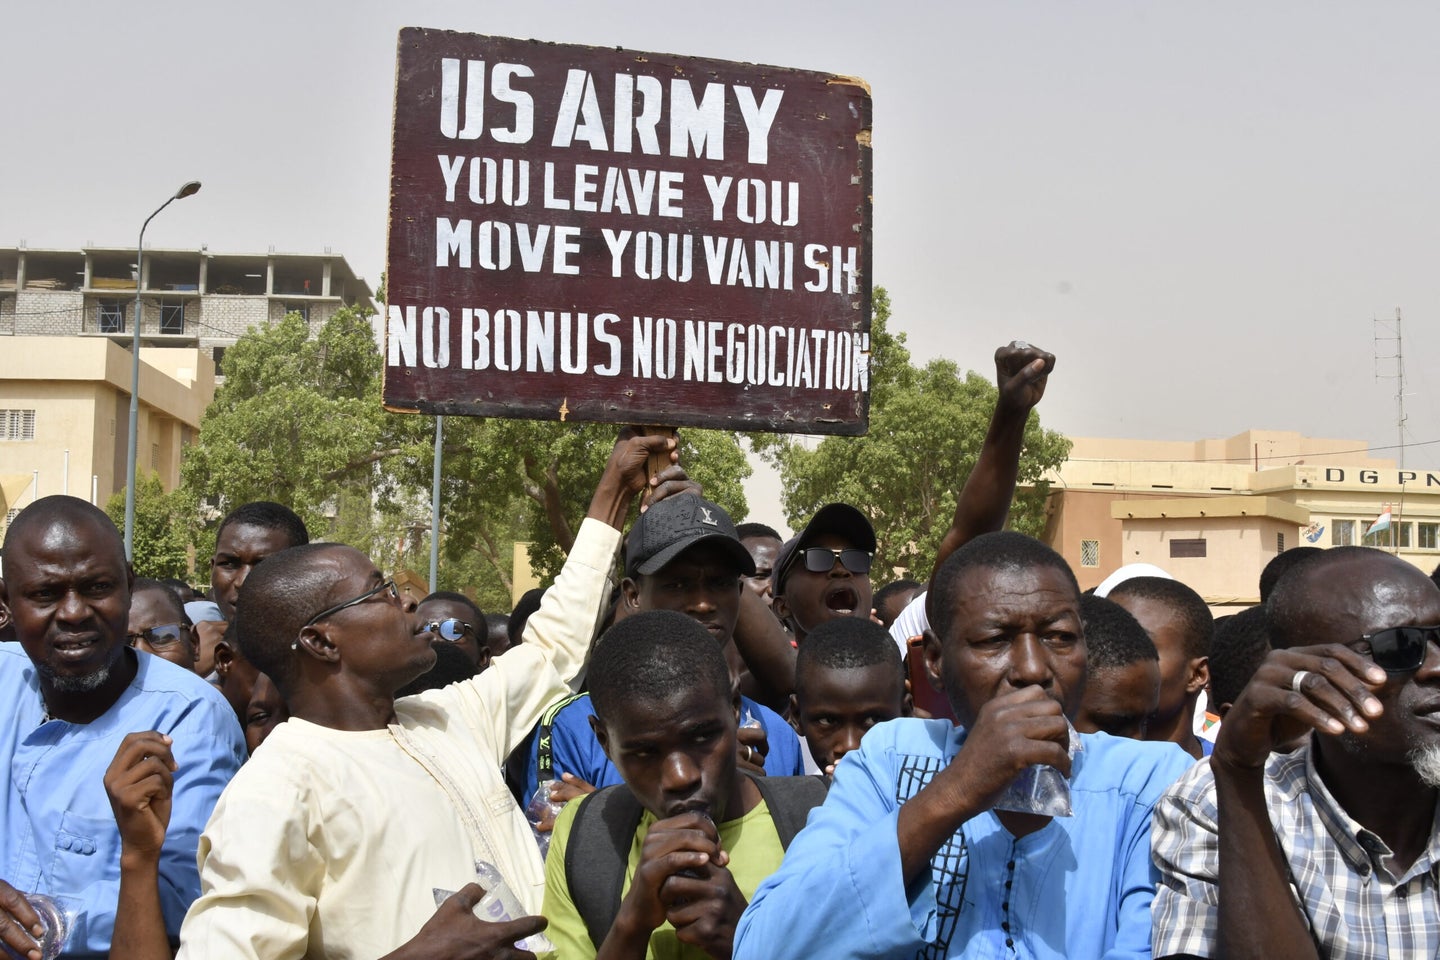 Protesters react as a man holds up a sign demanding that soldiers from the United States Army leave Niger without negotiation during a demonstration in Niamey, on April 13, 2024. Thousands of people demonstrated on April 13, 2024 in Niger's capital Niamey to demand the immediate departure of American soldiers based in northern Niger, after the military regime said it was withdrawing from a 2012 cooperation deal with Washington. (Photo by AFP) (Photo by -/AFP via Getty Images)